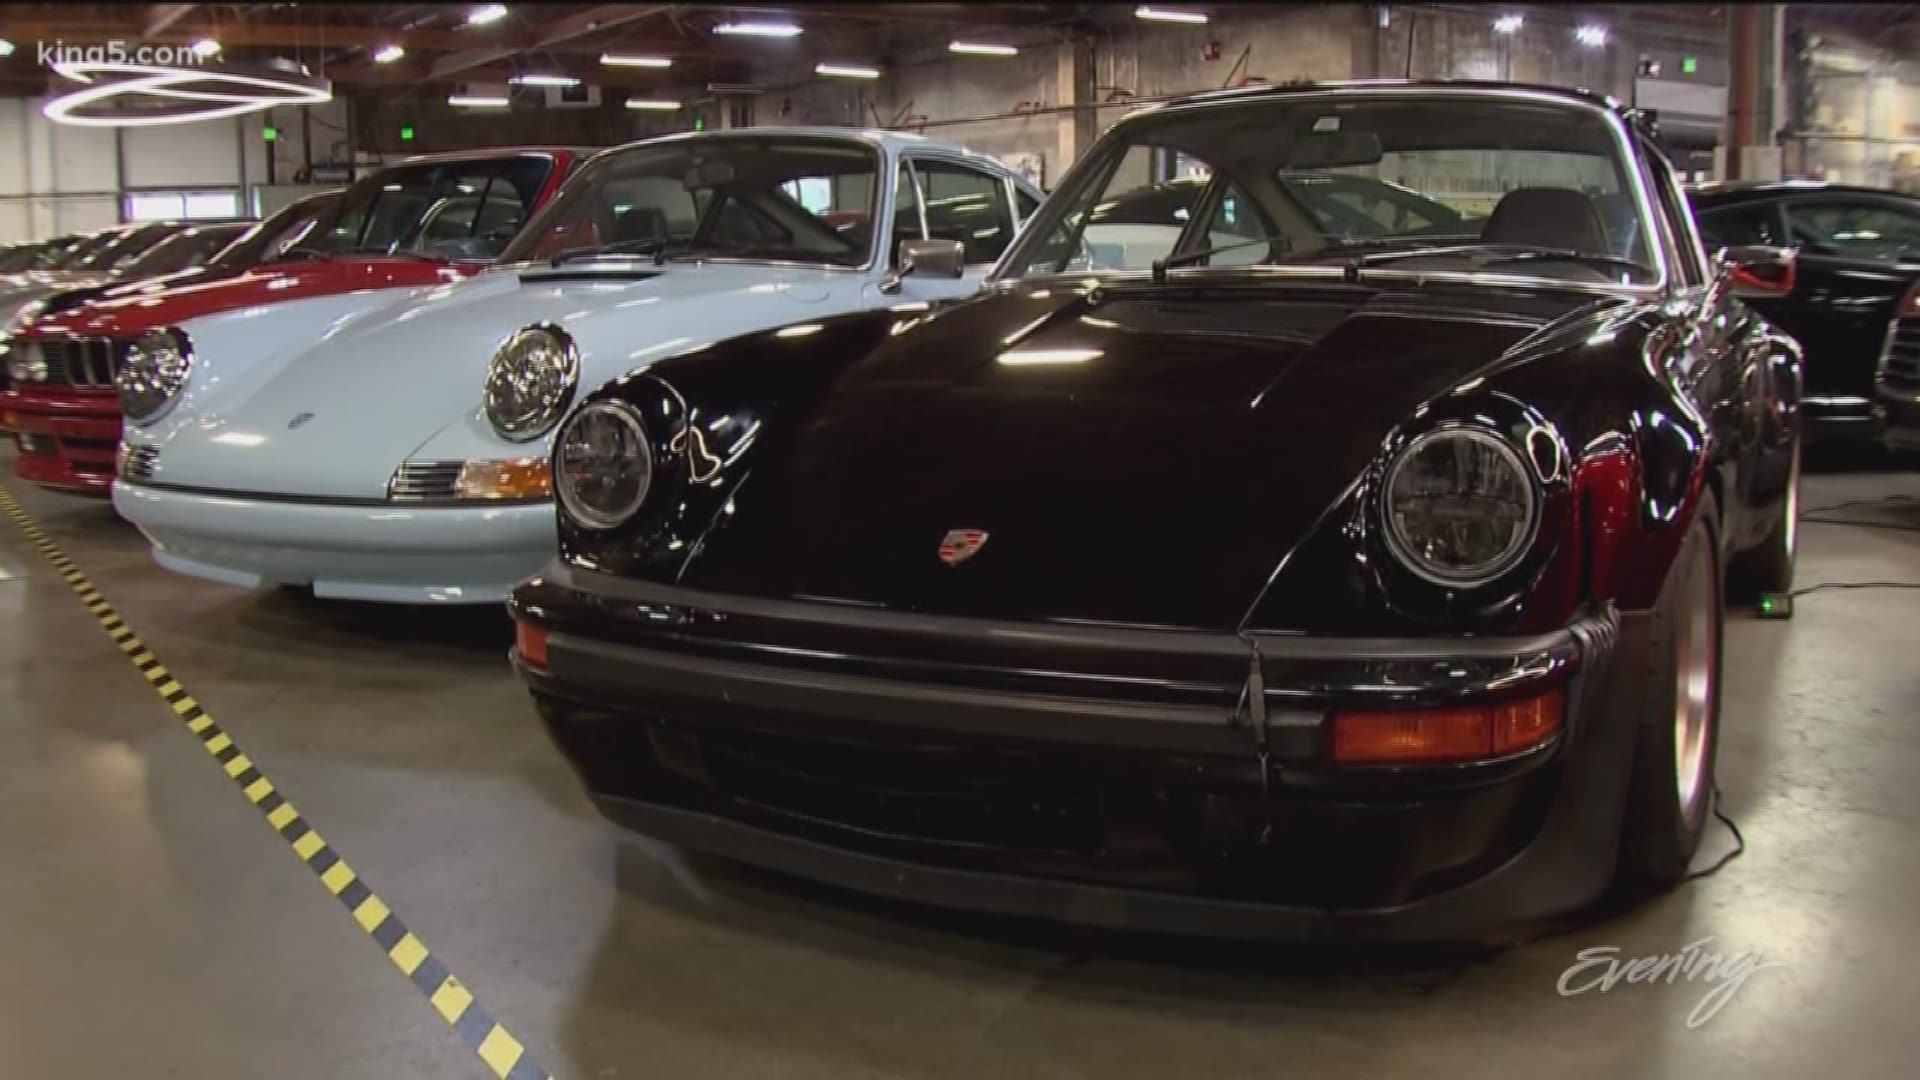 If you’ve ever dreamed about owning a classic car, a SODO business offers the next-best thing: renting one. Classic Auto Rentals has a fleet of more than half a dozen options, from a red ’52 MG to a black ’74 Porsche 911.